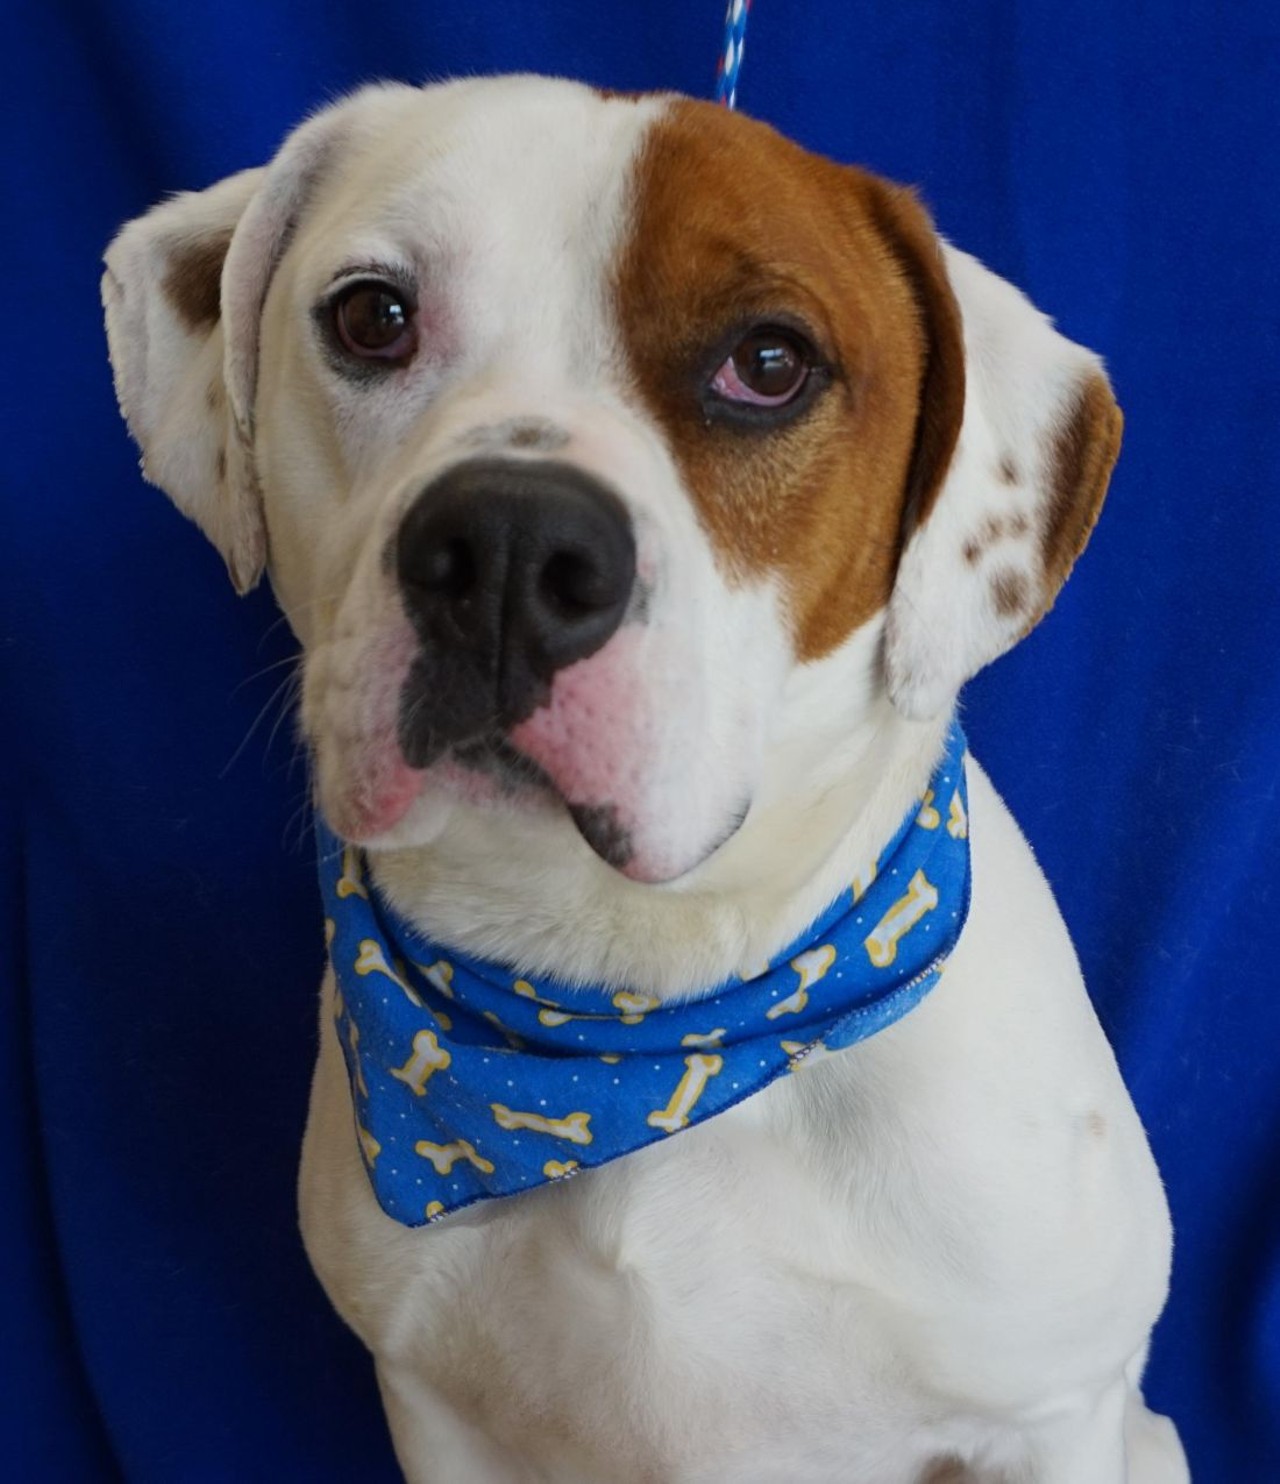 NAME: Big Bry
GENDER: Male 
BREED: American Bulldog 
AGE: 5 years 
WEIGHT: 70 pounds
SPECIAL CONSIDERATIONS: May prefer to be your only pet 
REASON I CAME TO MHS: Agency transfer 
LOCATION: Mackey Center for Animal Care in Detroit 
ID NUMBER: 866793 